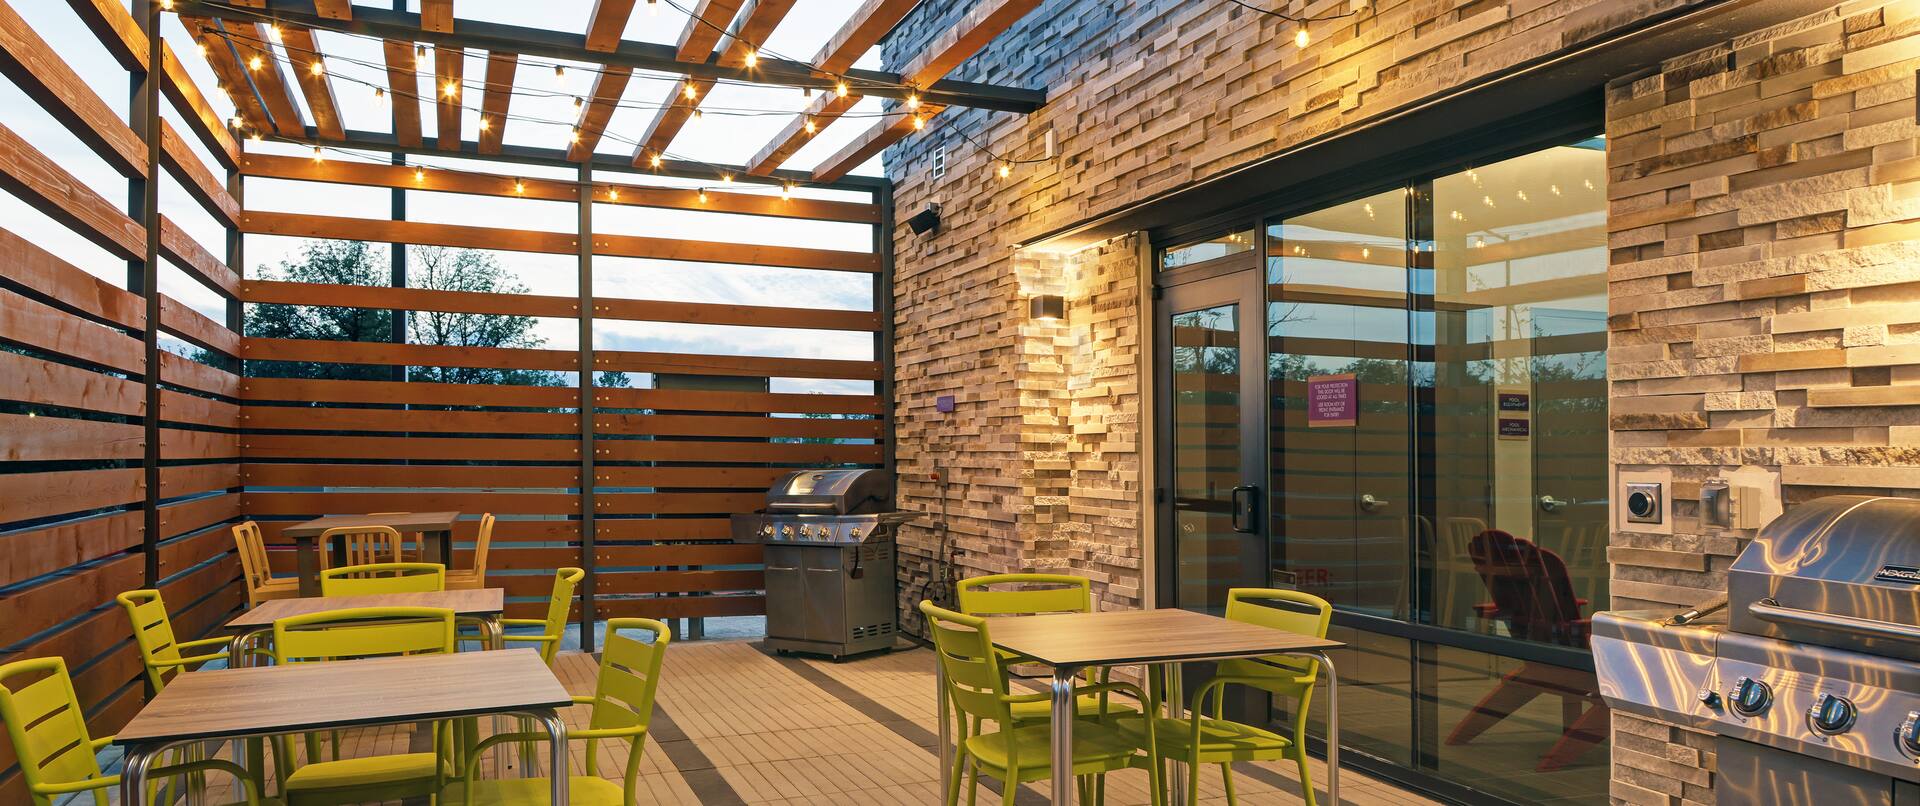 outdoor patio with grills at dusk